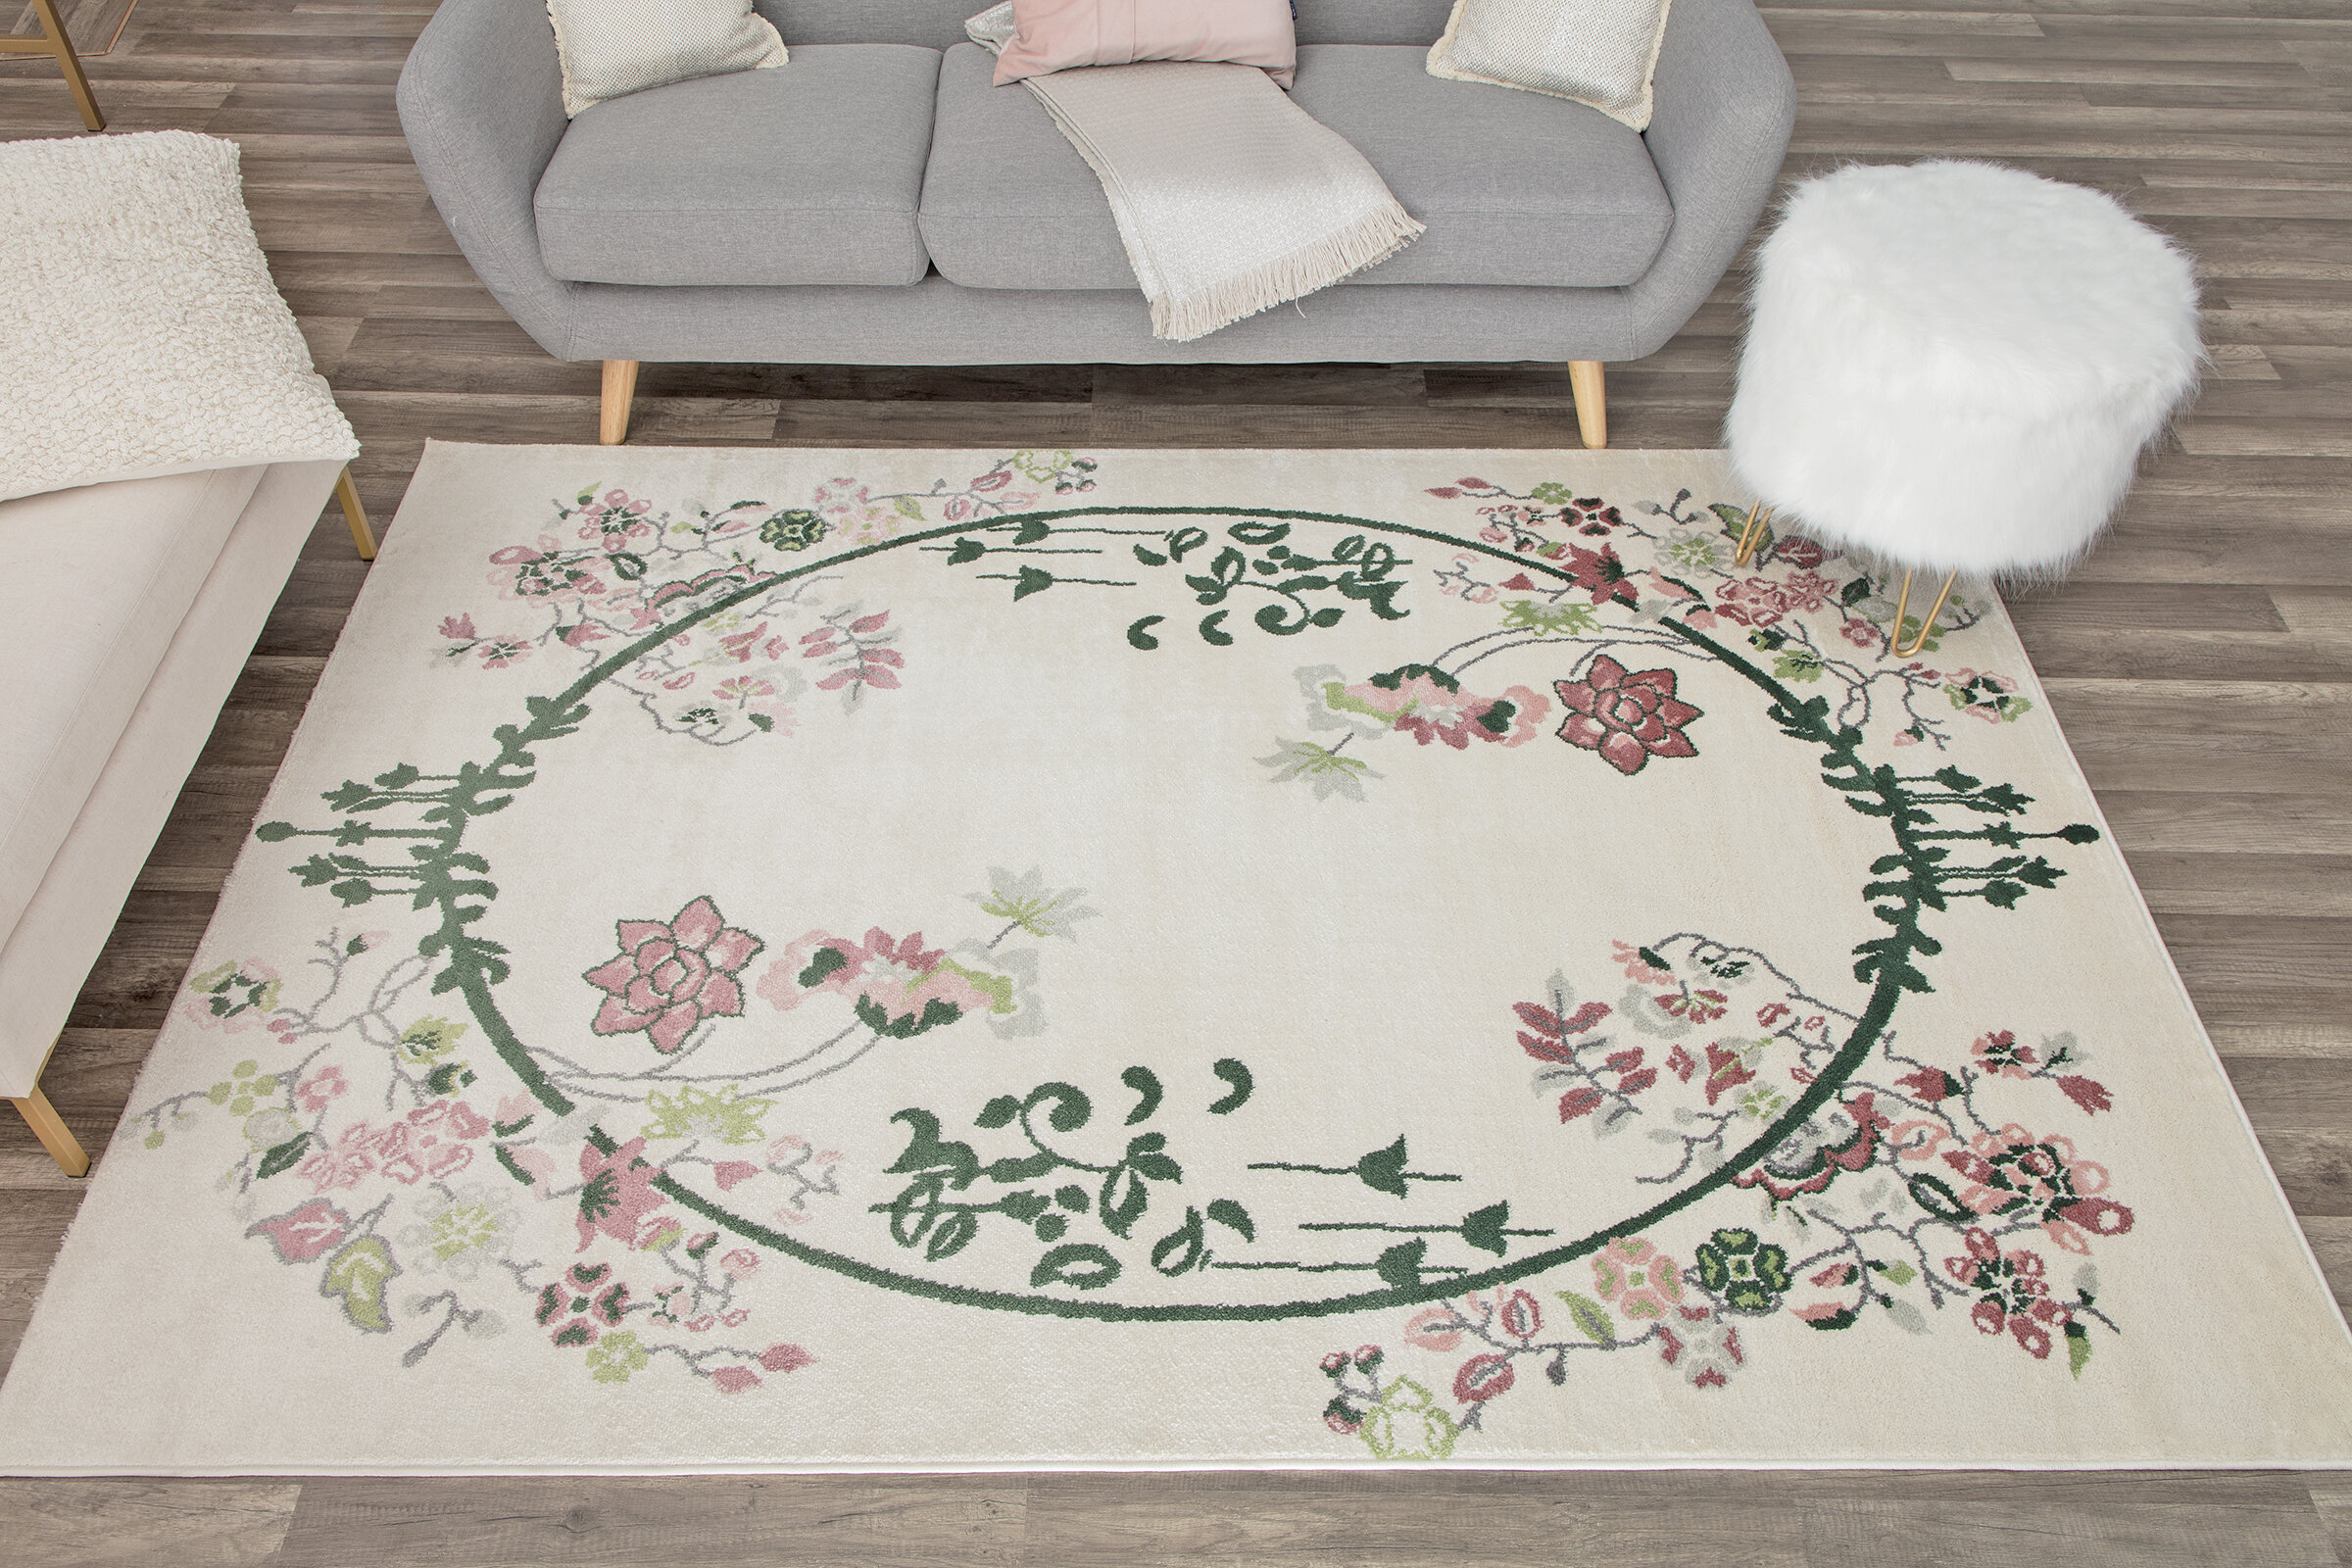 Living Room Bedroom Kitchen Decorative Unique Lightweight Printed Rugs Carpet ALAZA My Daily Vintage Flower Dark Green Floral Area Rug 3'3 x 5' 